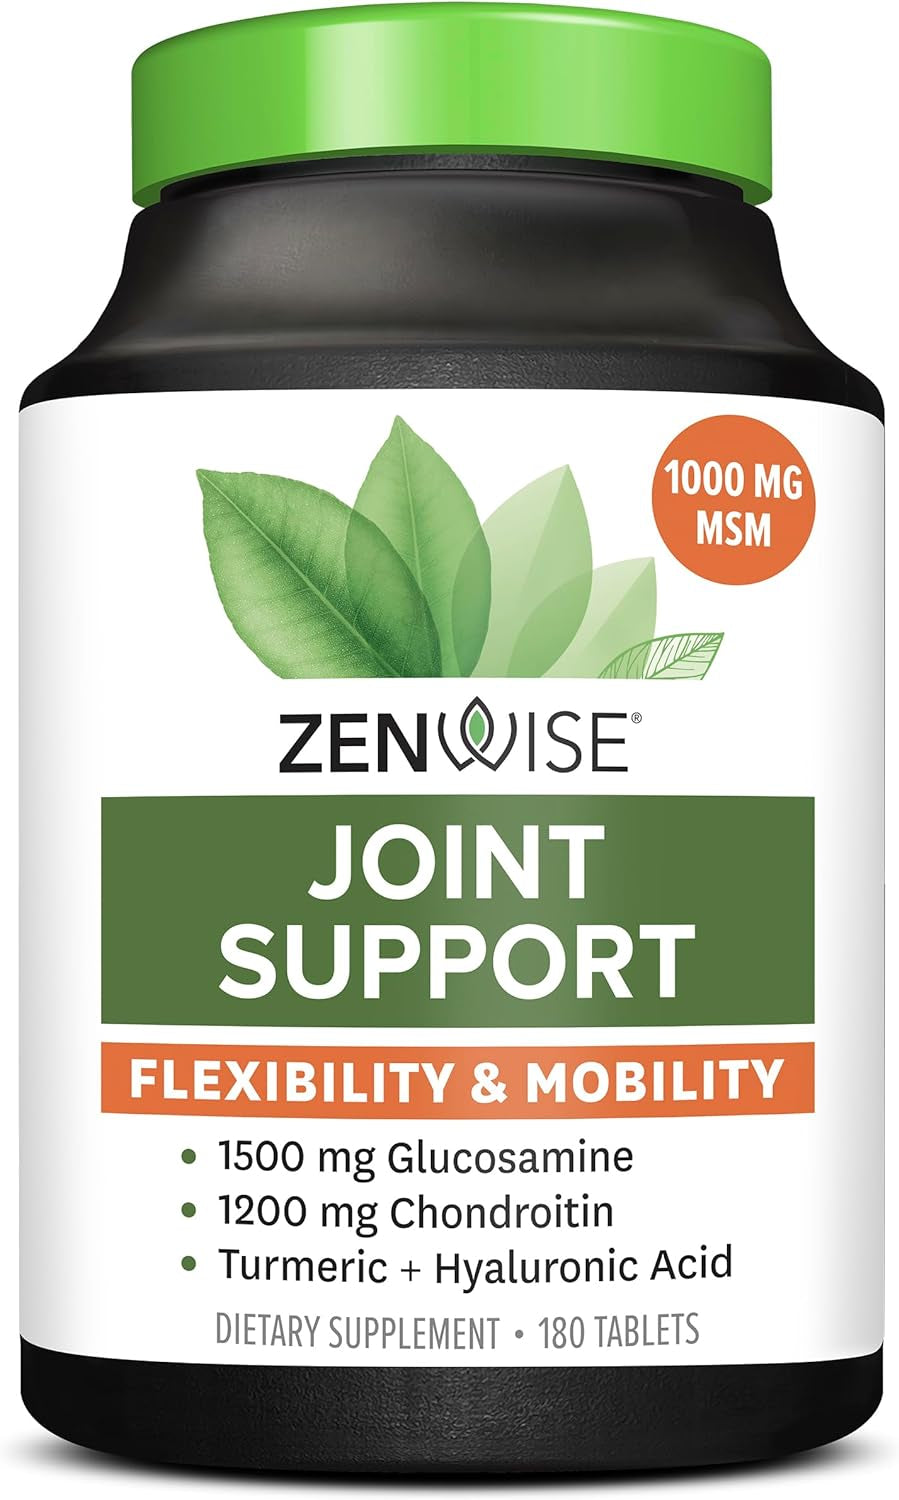 Zenwise Health Glucosamine Chondroitin MSM - Joint Support Supplement with Turmeric for Hands, Back, Knee, and Joint Health, Advanced Relief for Bone and Joint Flexibility and Mobility - 180 Capsules